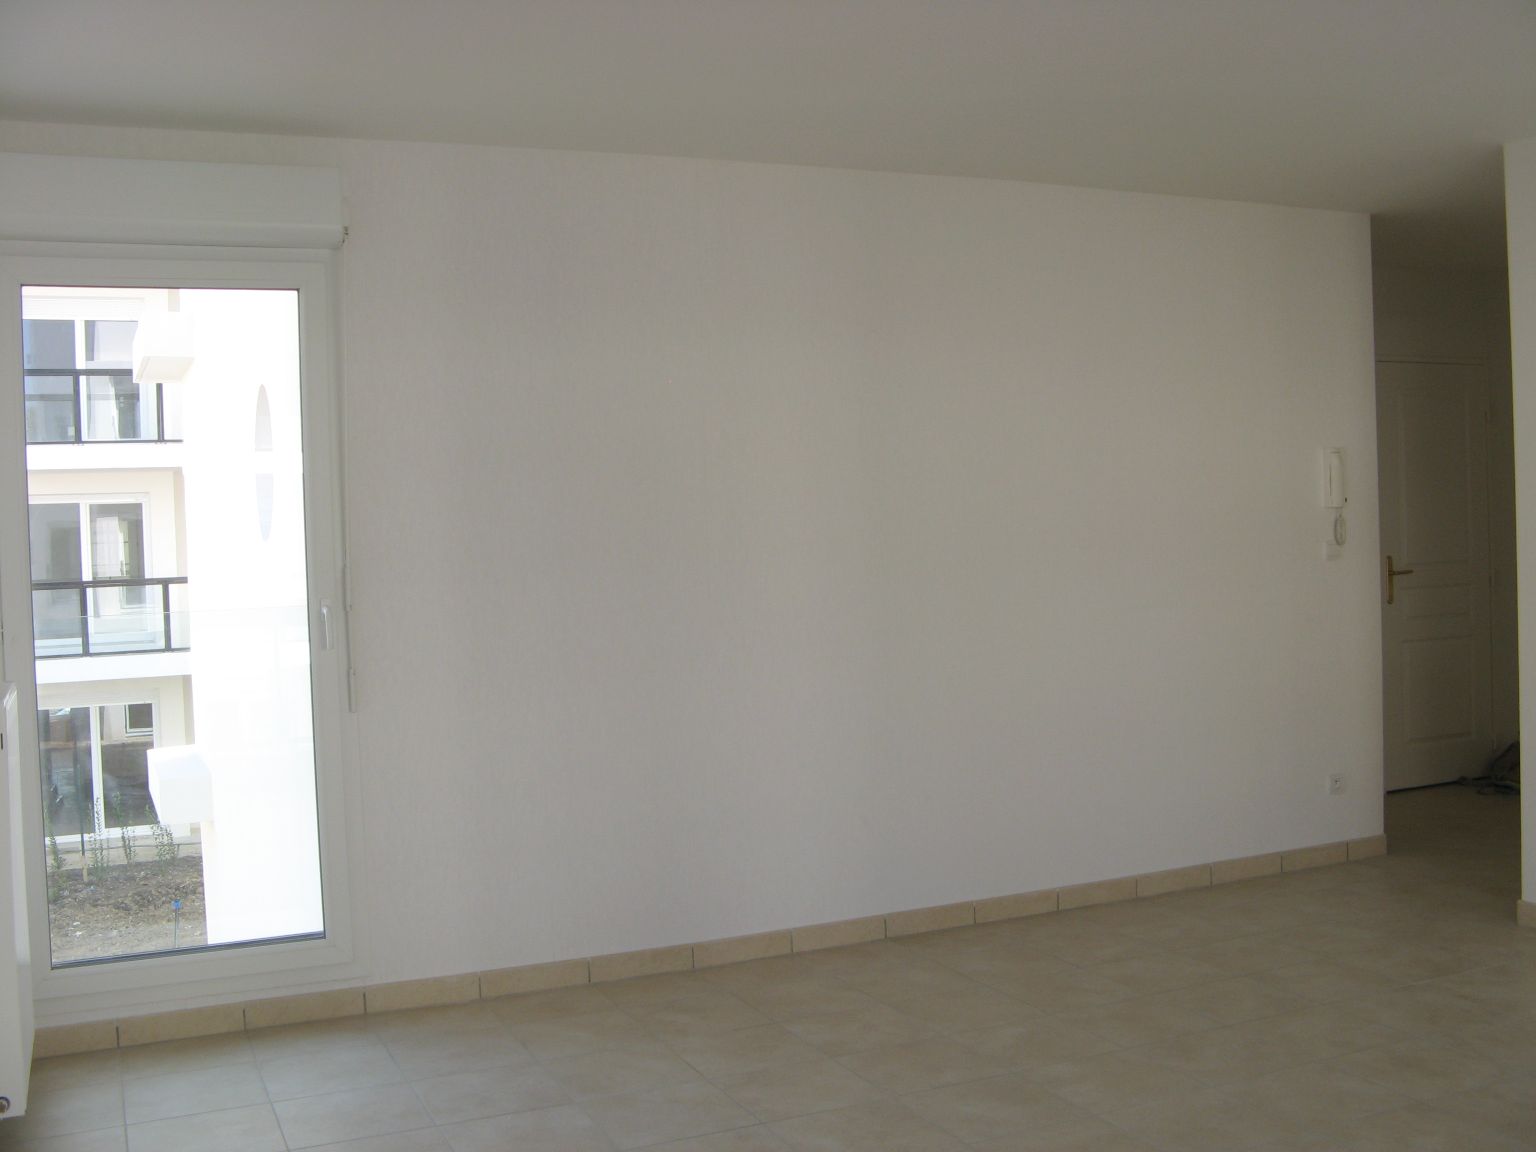 [my apartment: empty living room (before moving), East]